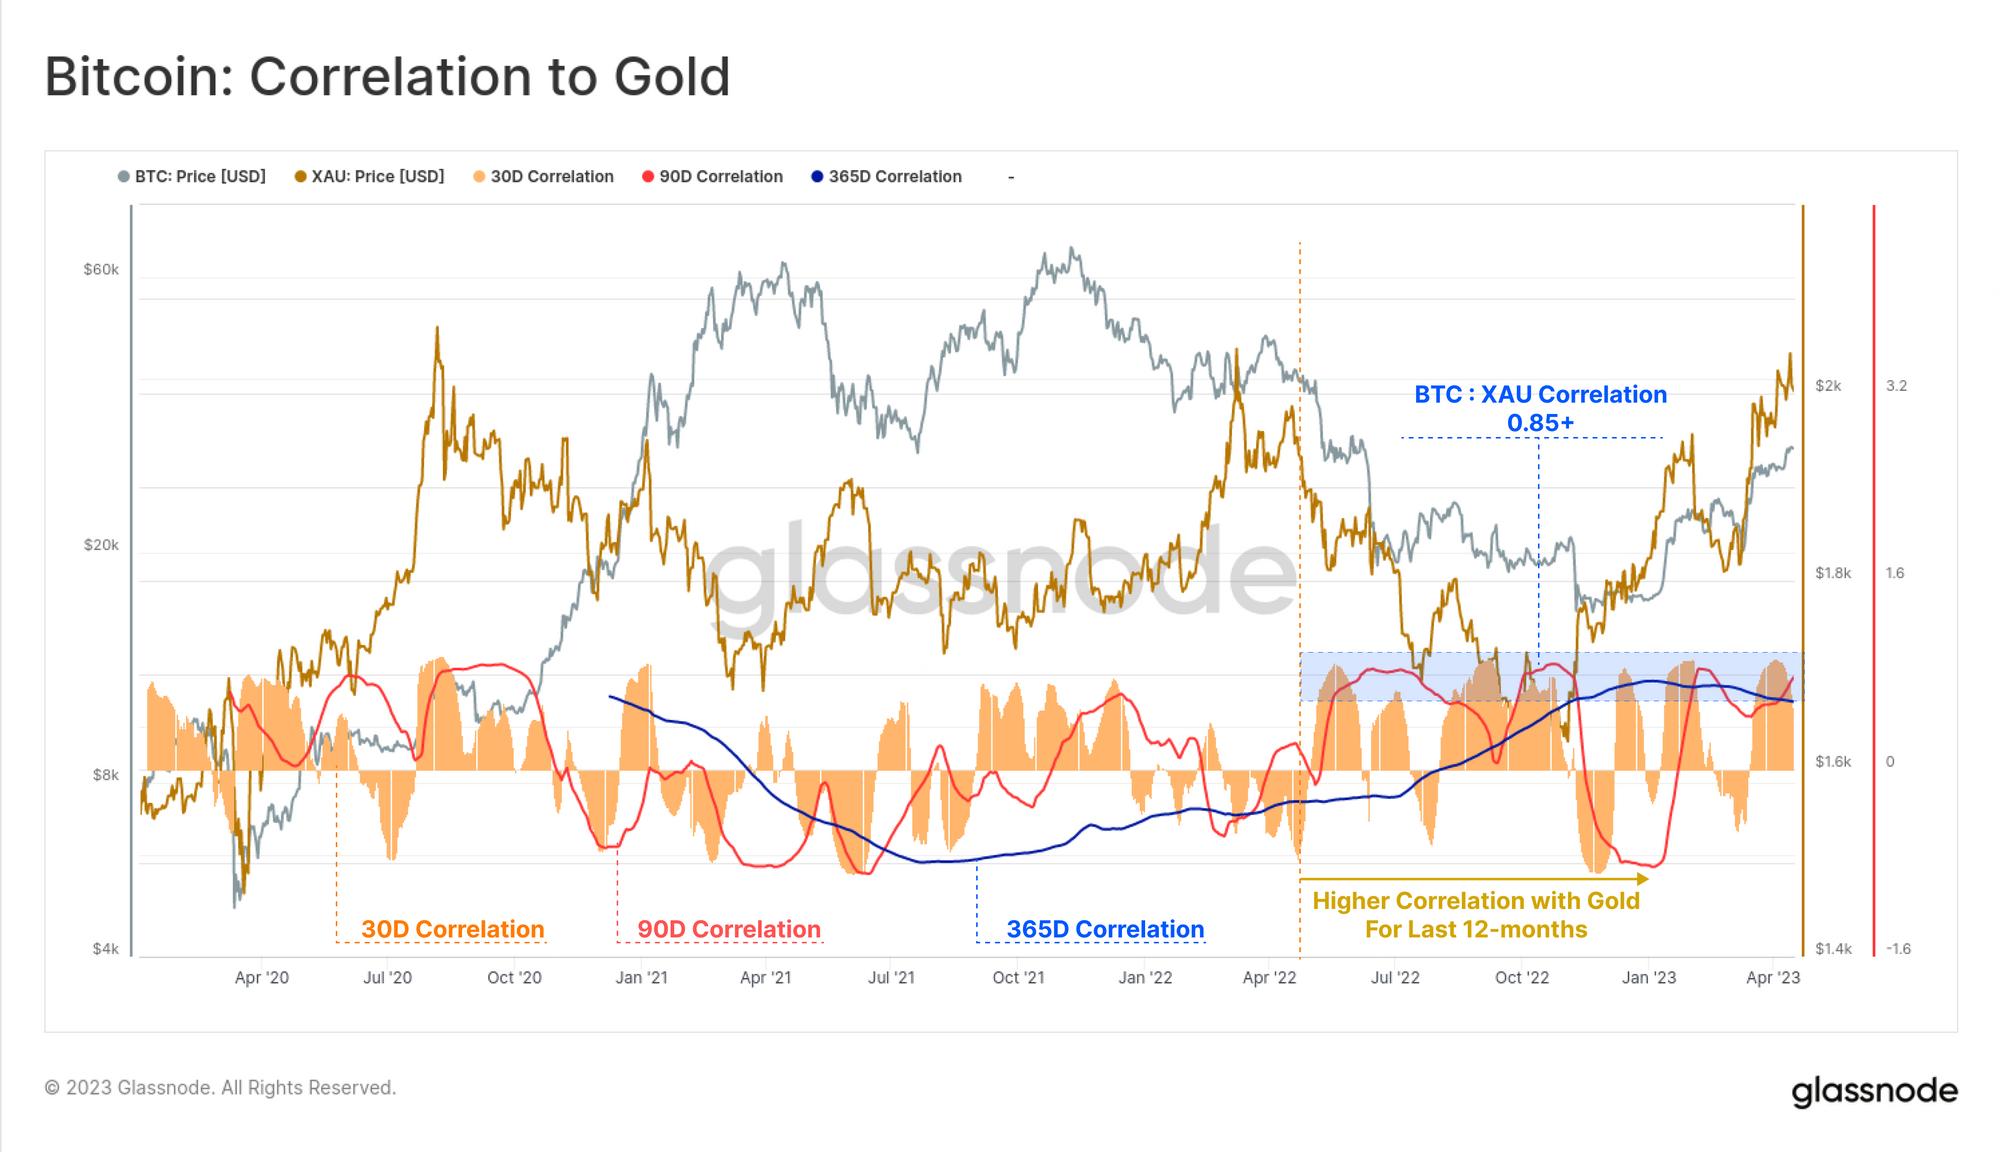 Bitcoin's Correlation with Gold